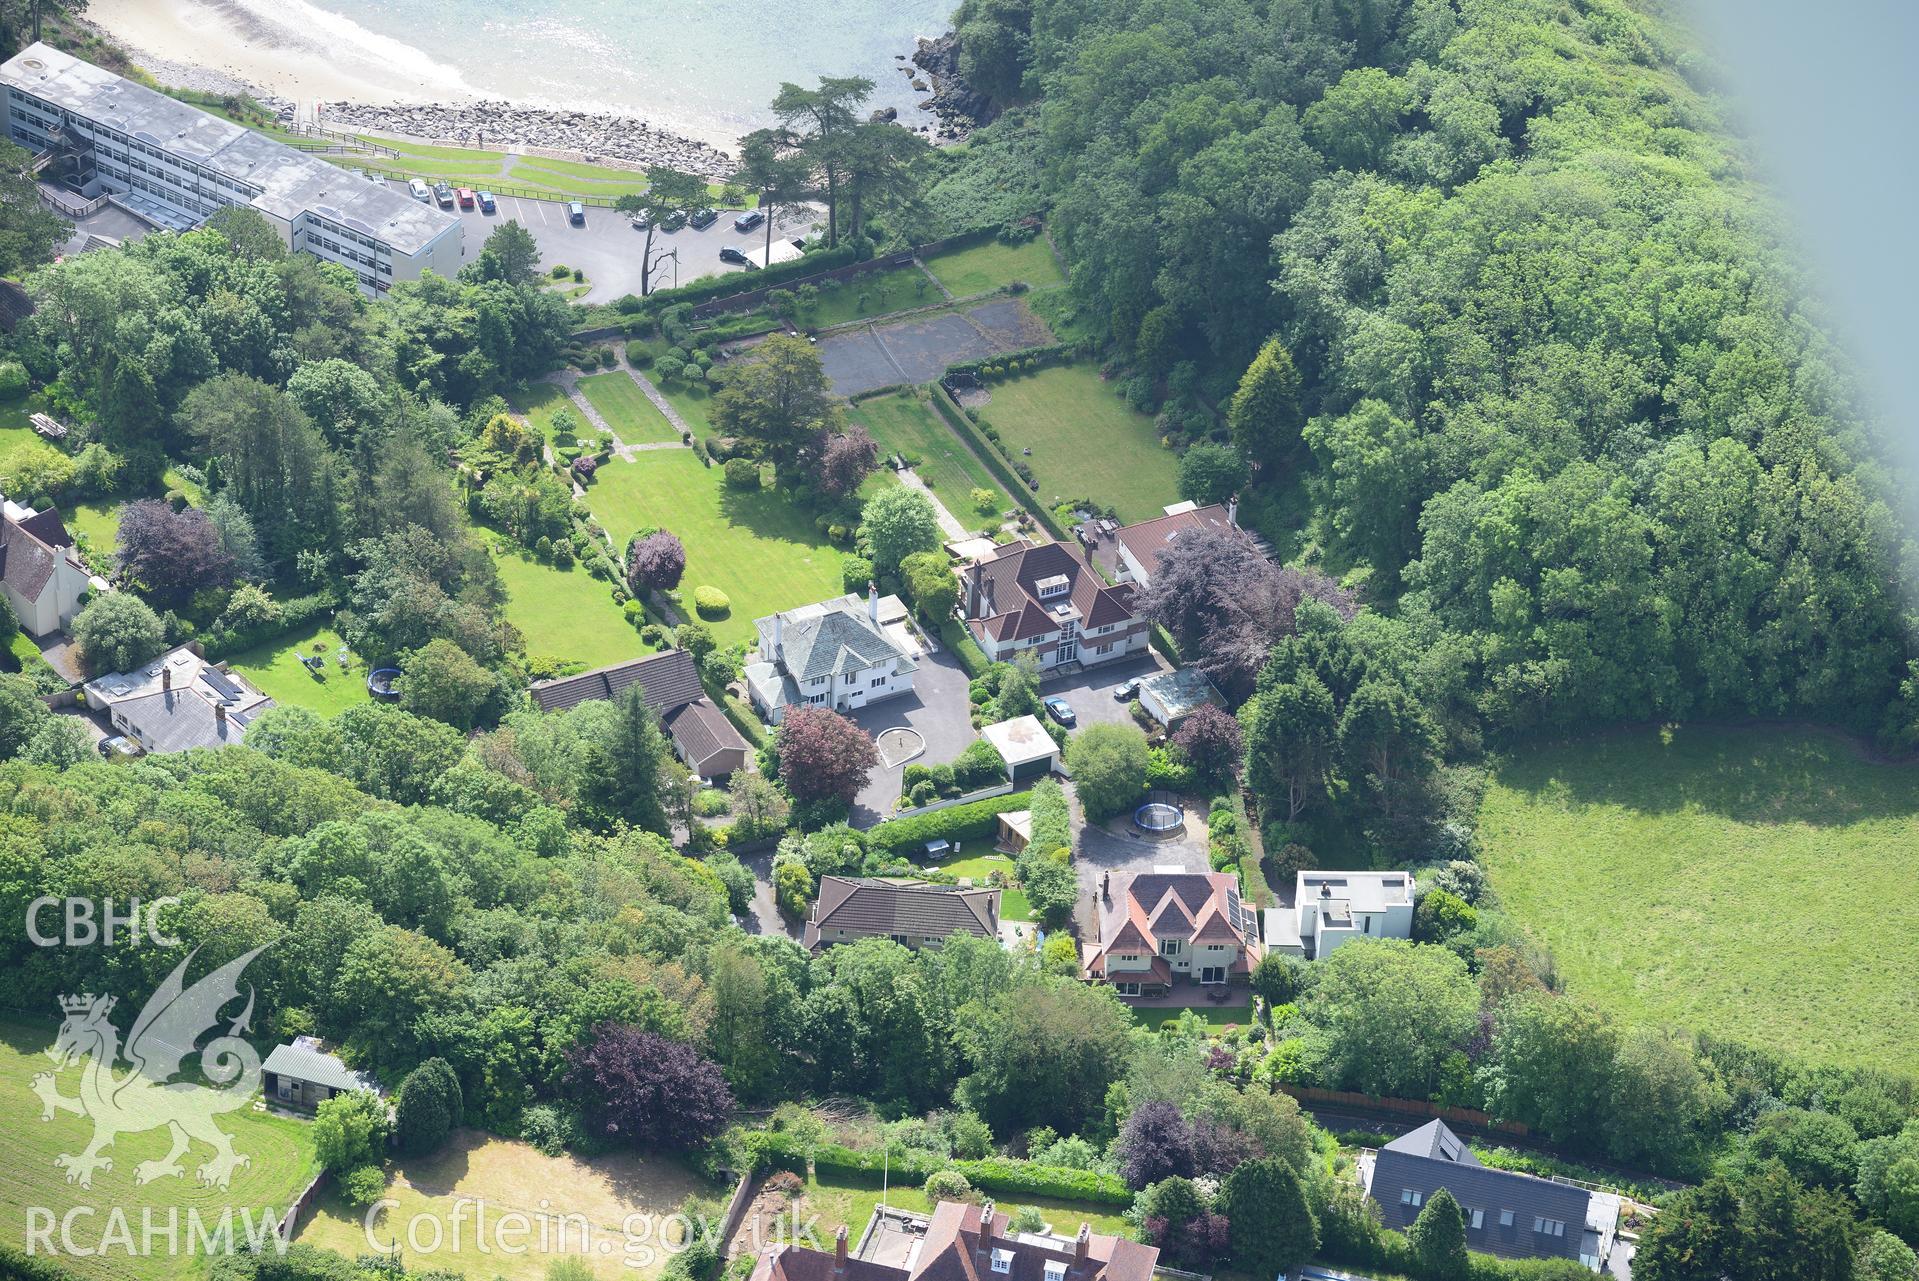 Housing at Caswell Bay. Oblique aerial photograph taken during the Royal Commission's programme of archaeological aerial reconnaissance by Toby Driver on 19th June 2015.